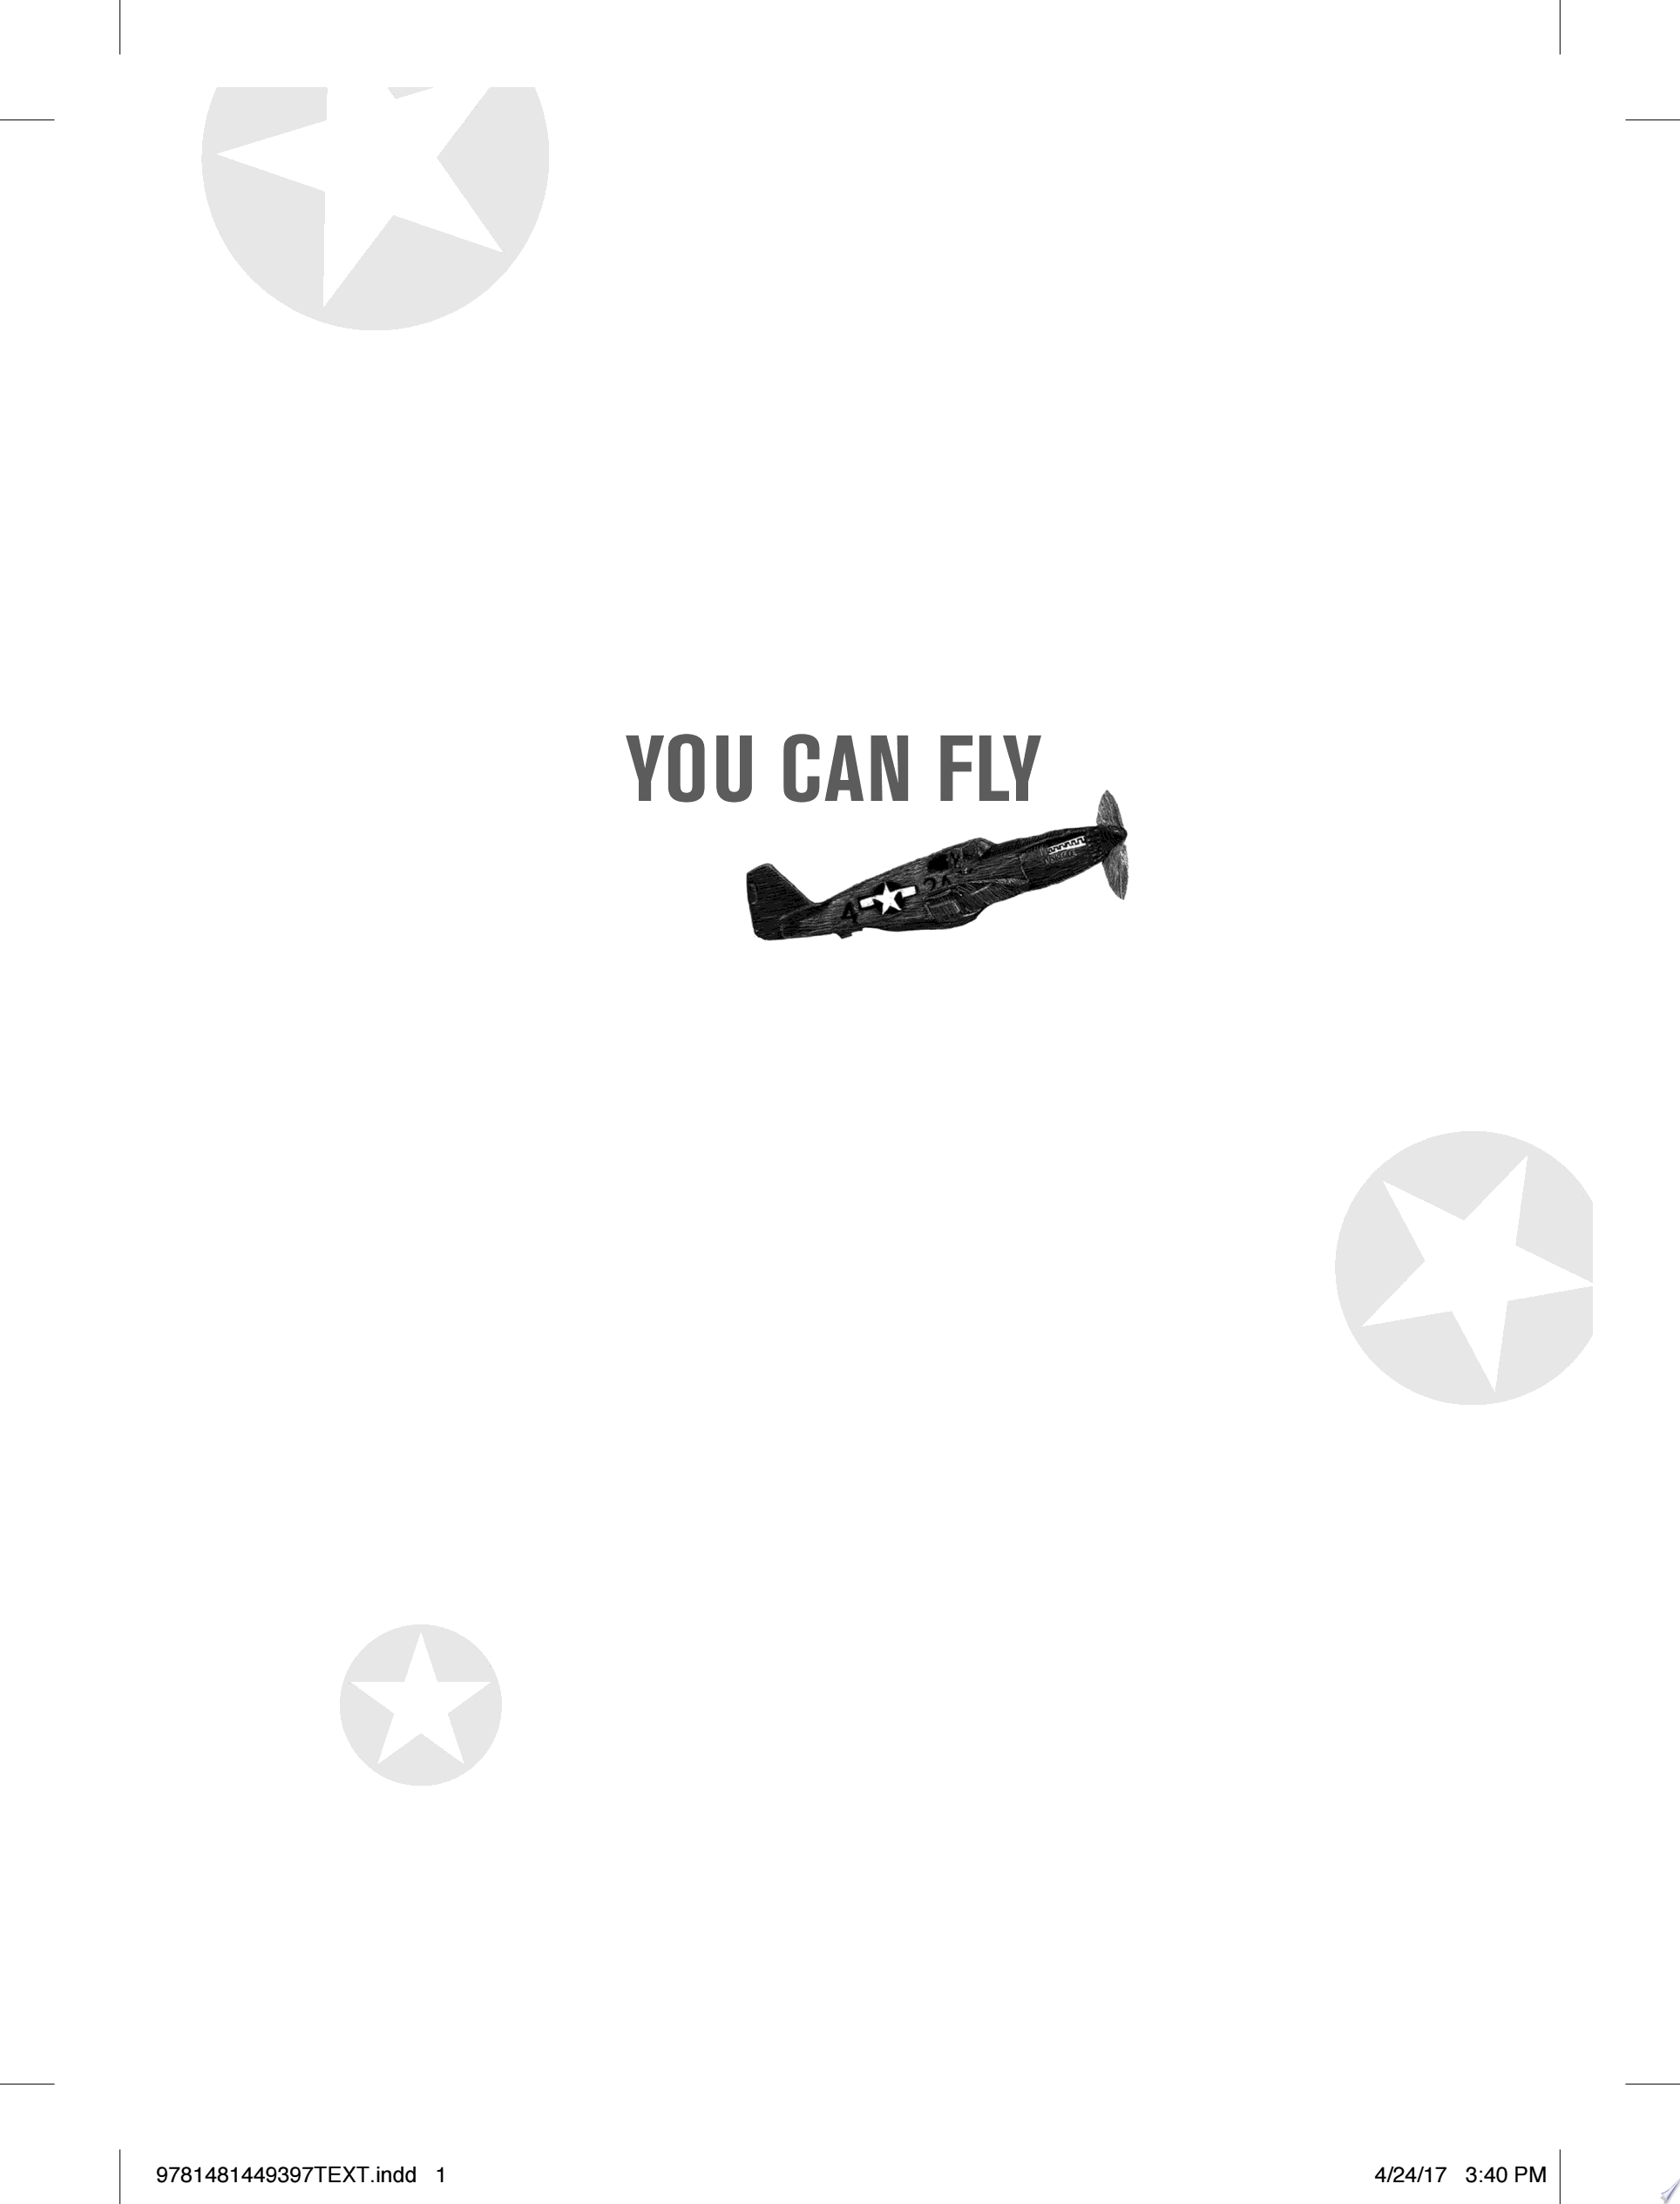 Image for "You Can Fly"